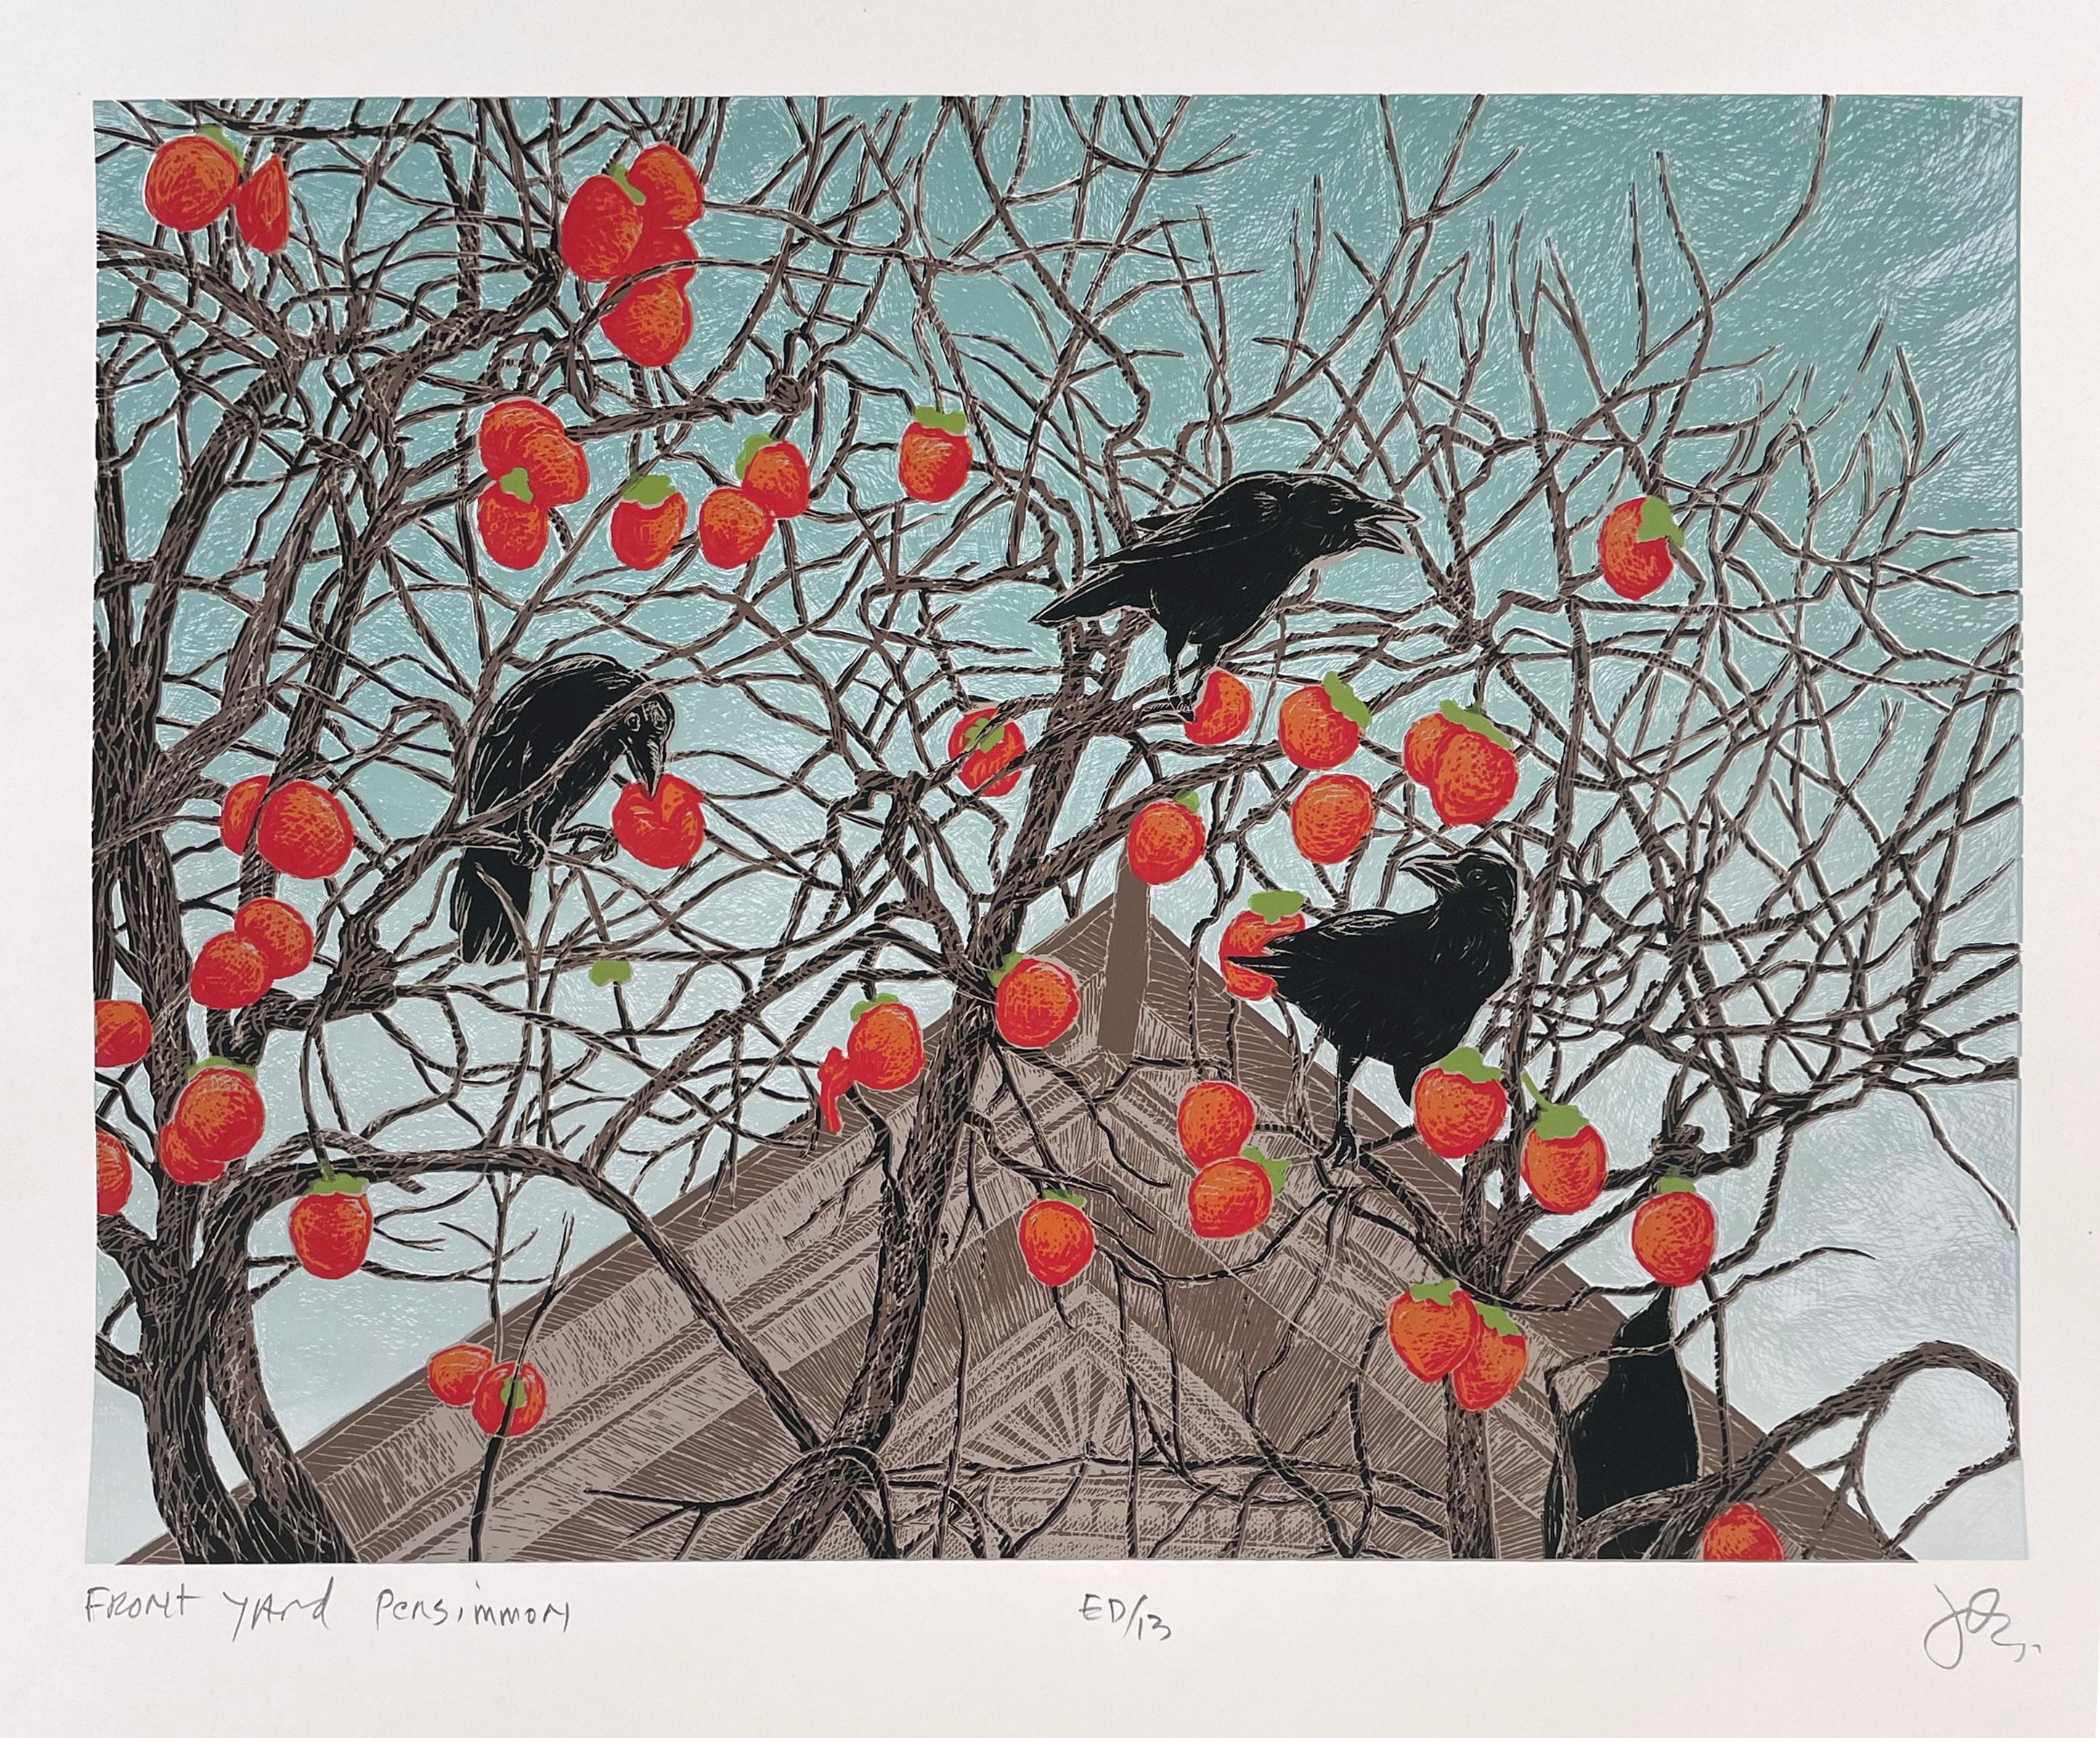 Front Yard Persimmons - Print by Jos Sances